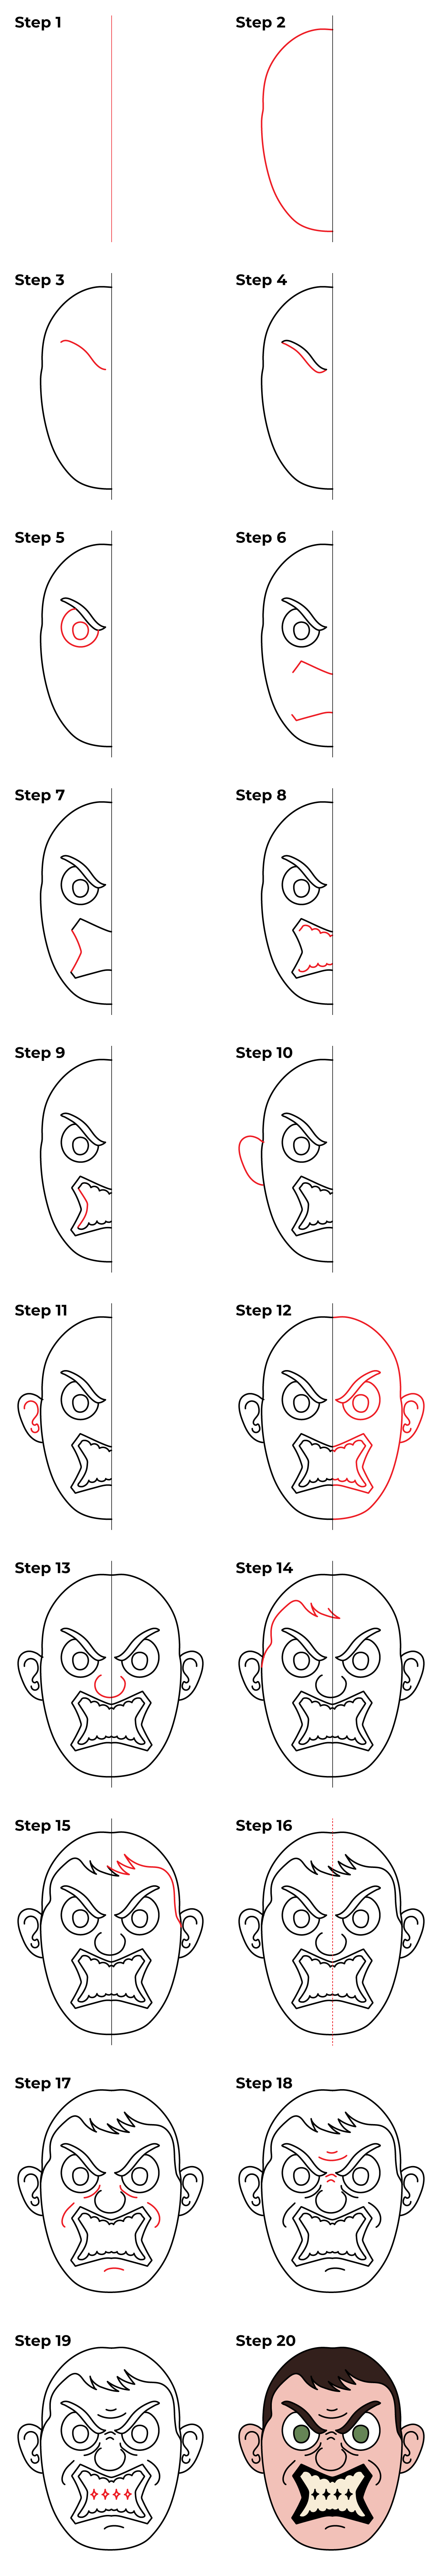 How to Draw an Angry Face - Printable Tutorial